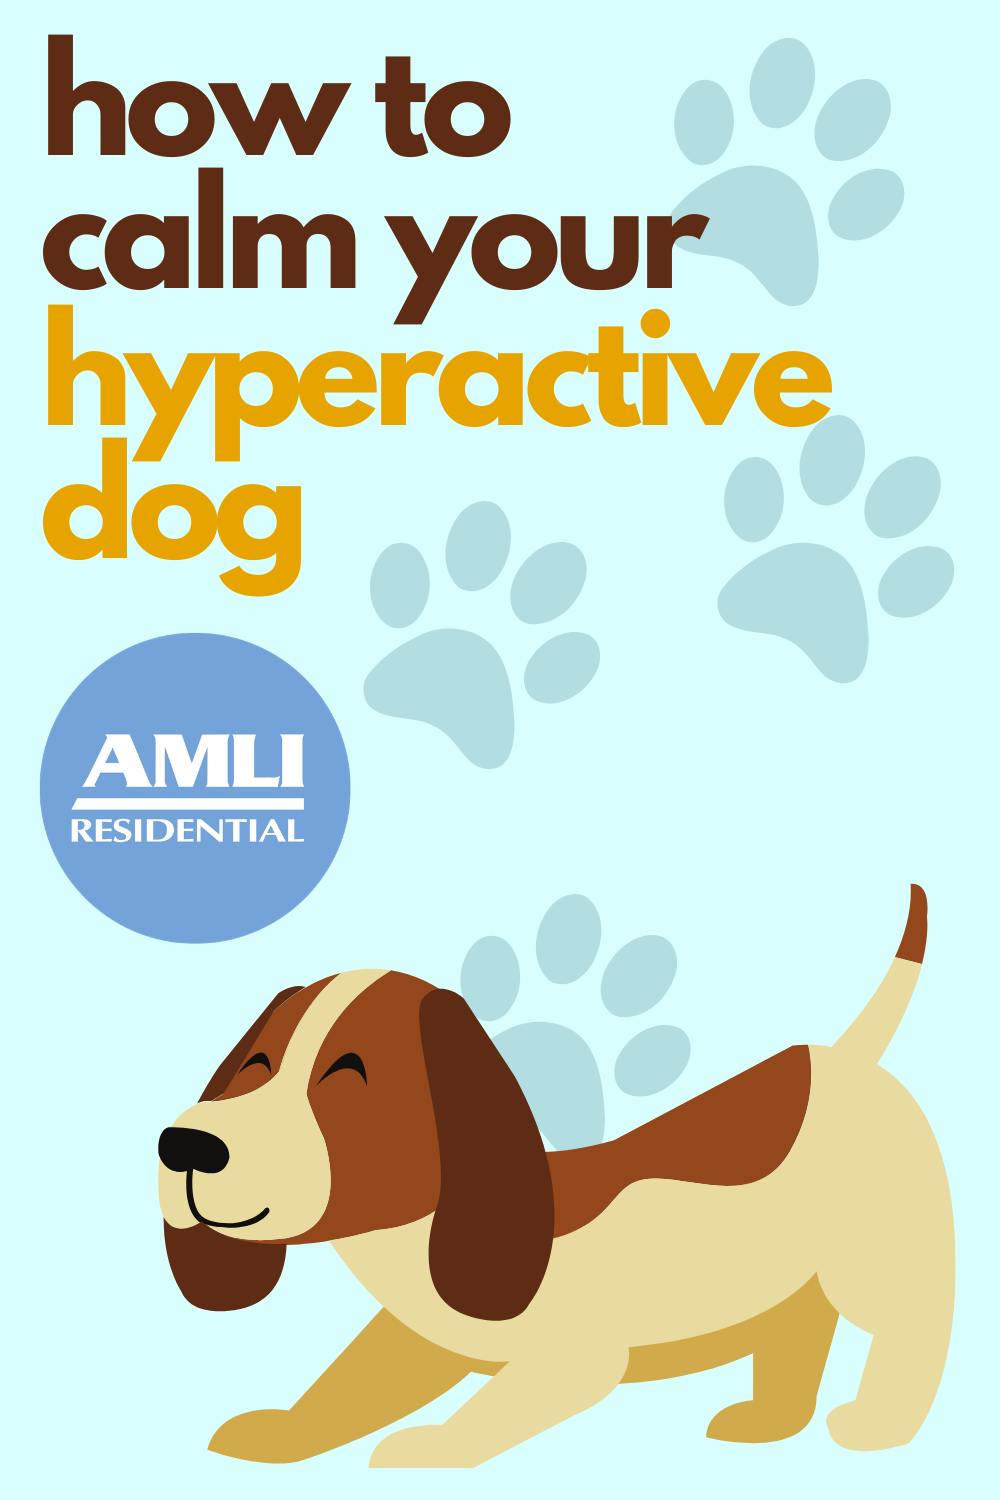 Dog Too Hyper: How to Calm an Energetic Dog or Hyperactive Puppy